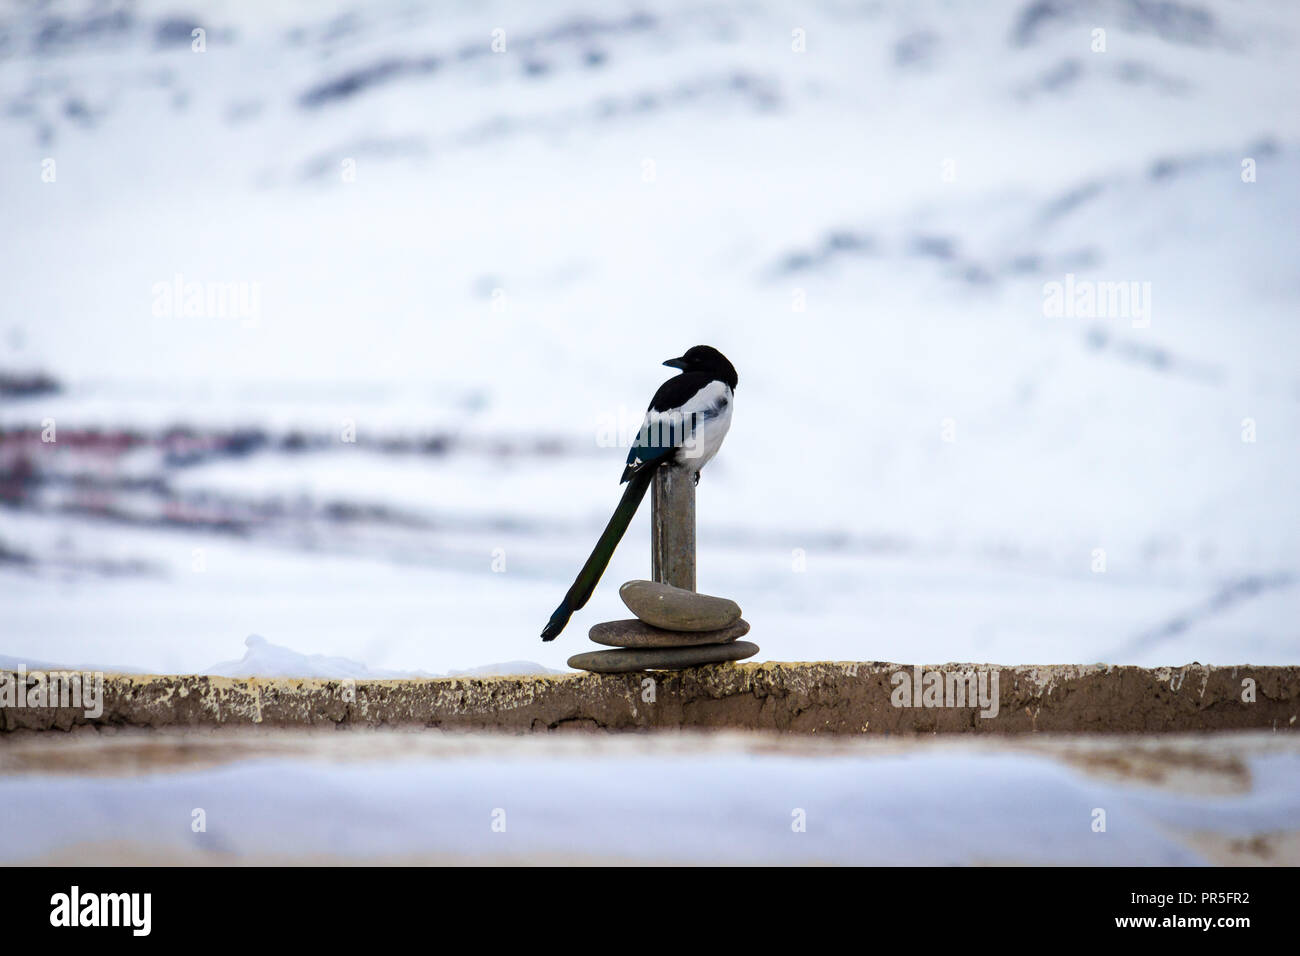 The Himalayan Magpie - Wildlife in the snow cold weather of Ladakh, Jammu and Kashmir, India, Asia. Stock Photo